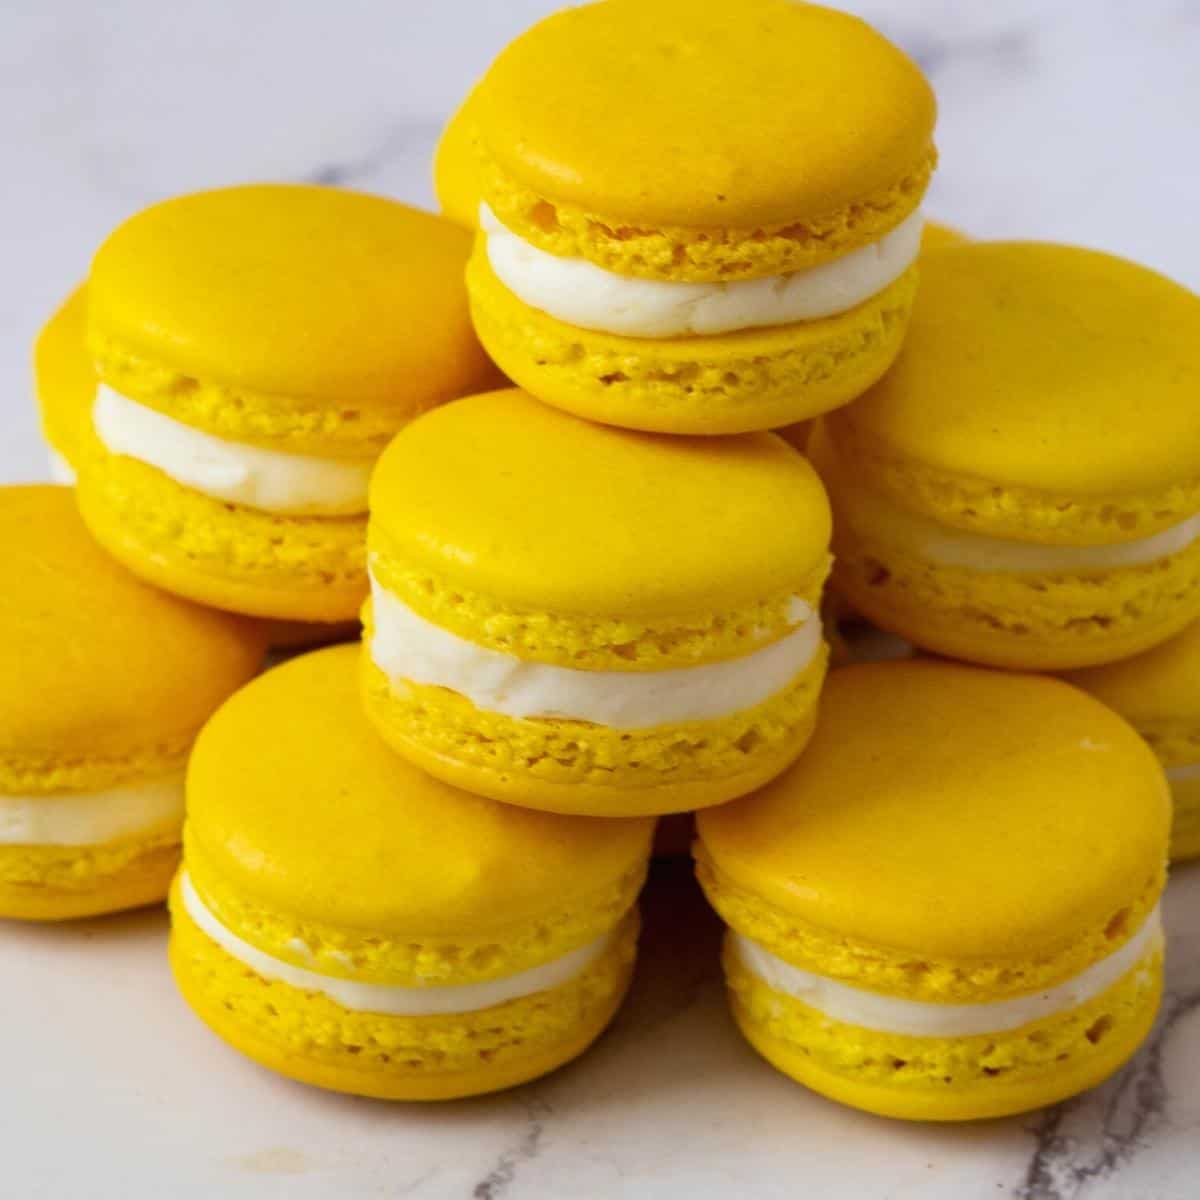 Stacked yellow French macarons.